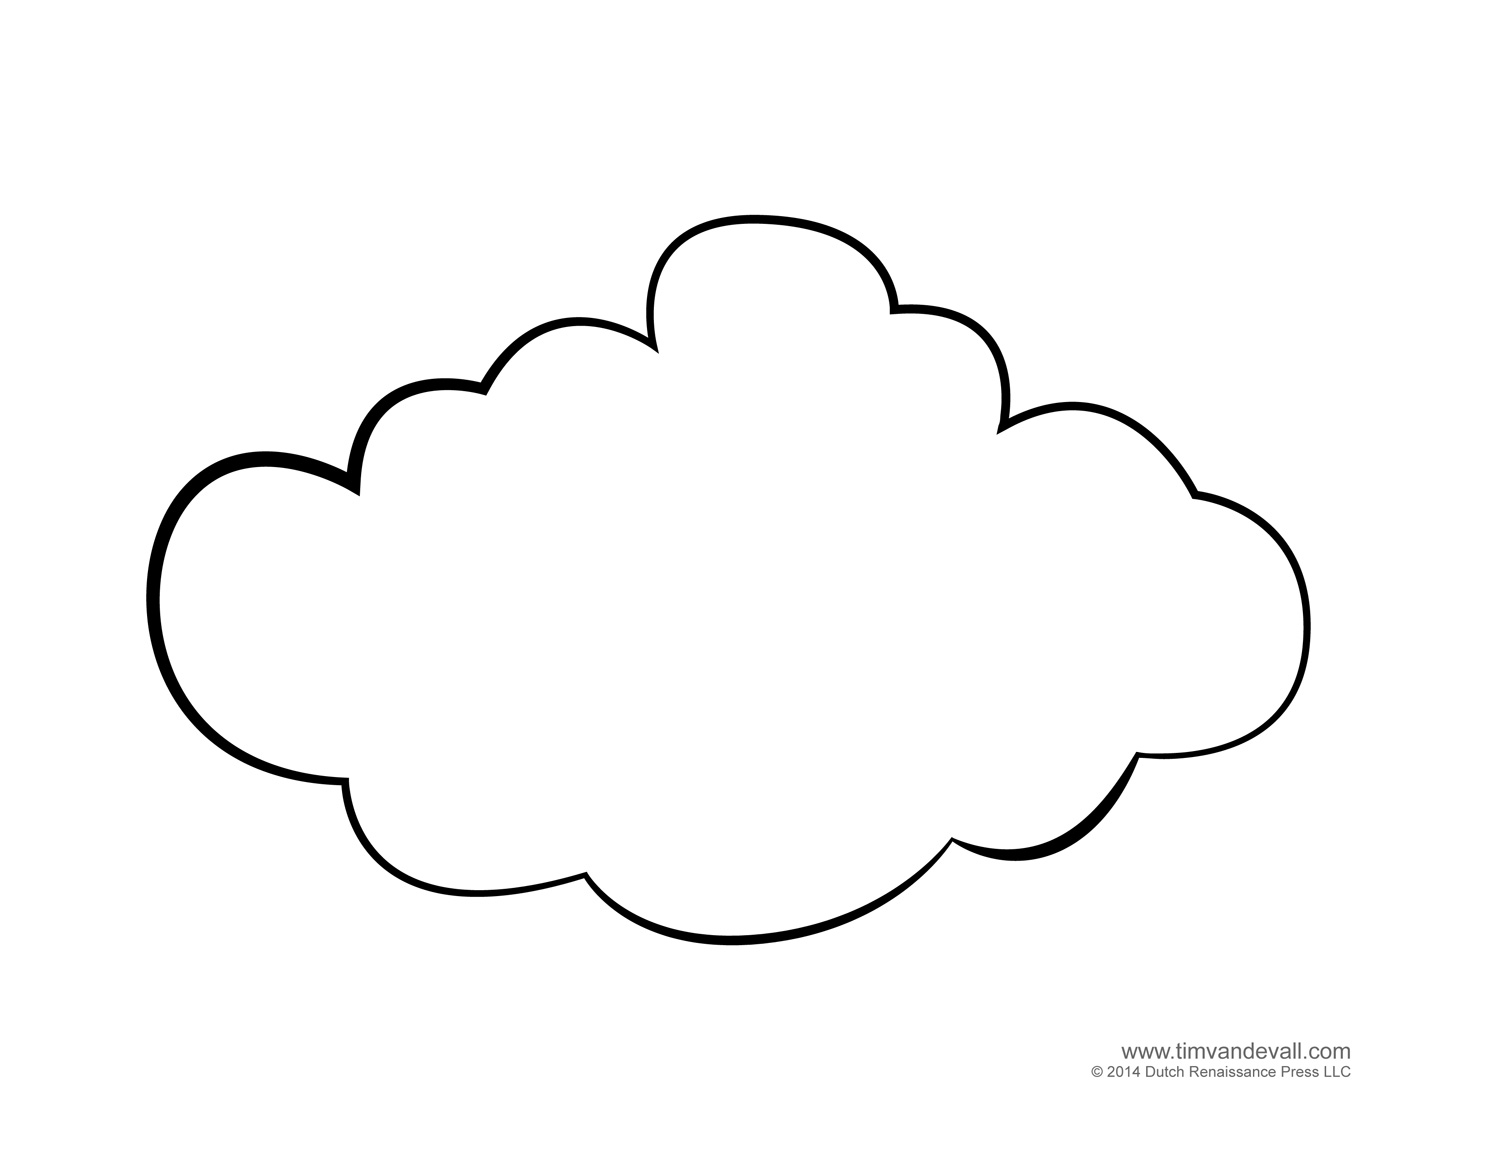 Small cloud template.